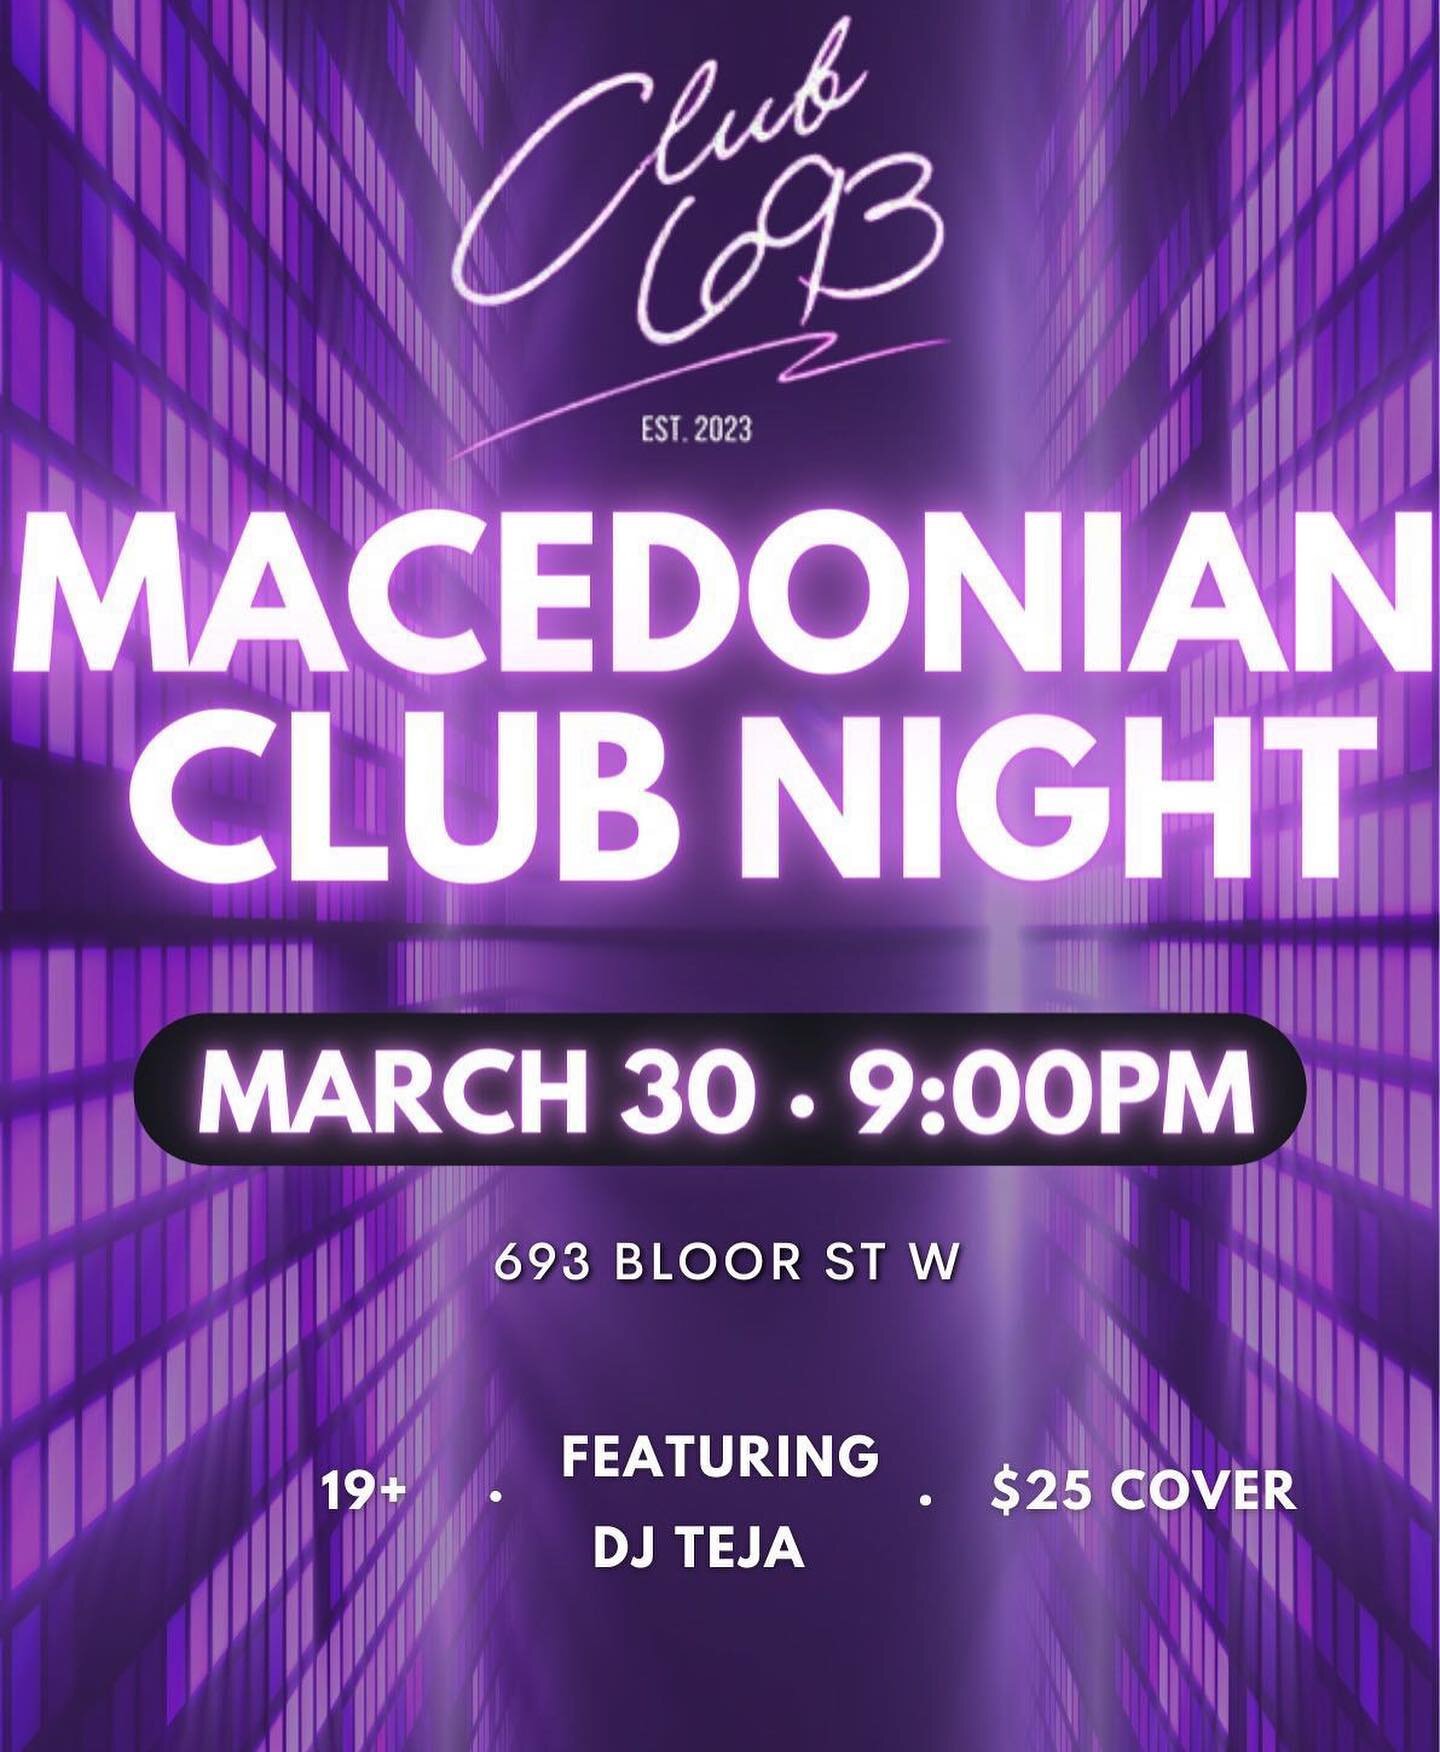 Hosted by Torontos&rsquo; Macedonian youth.
The event will take place in the private night-club section at CLUB 693 located just west of the University of Toronto in the ever growing party hub of the city!
Featuring the electric D.J. Teja // TOP 40, 